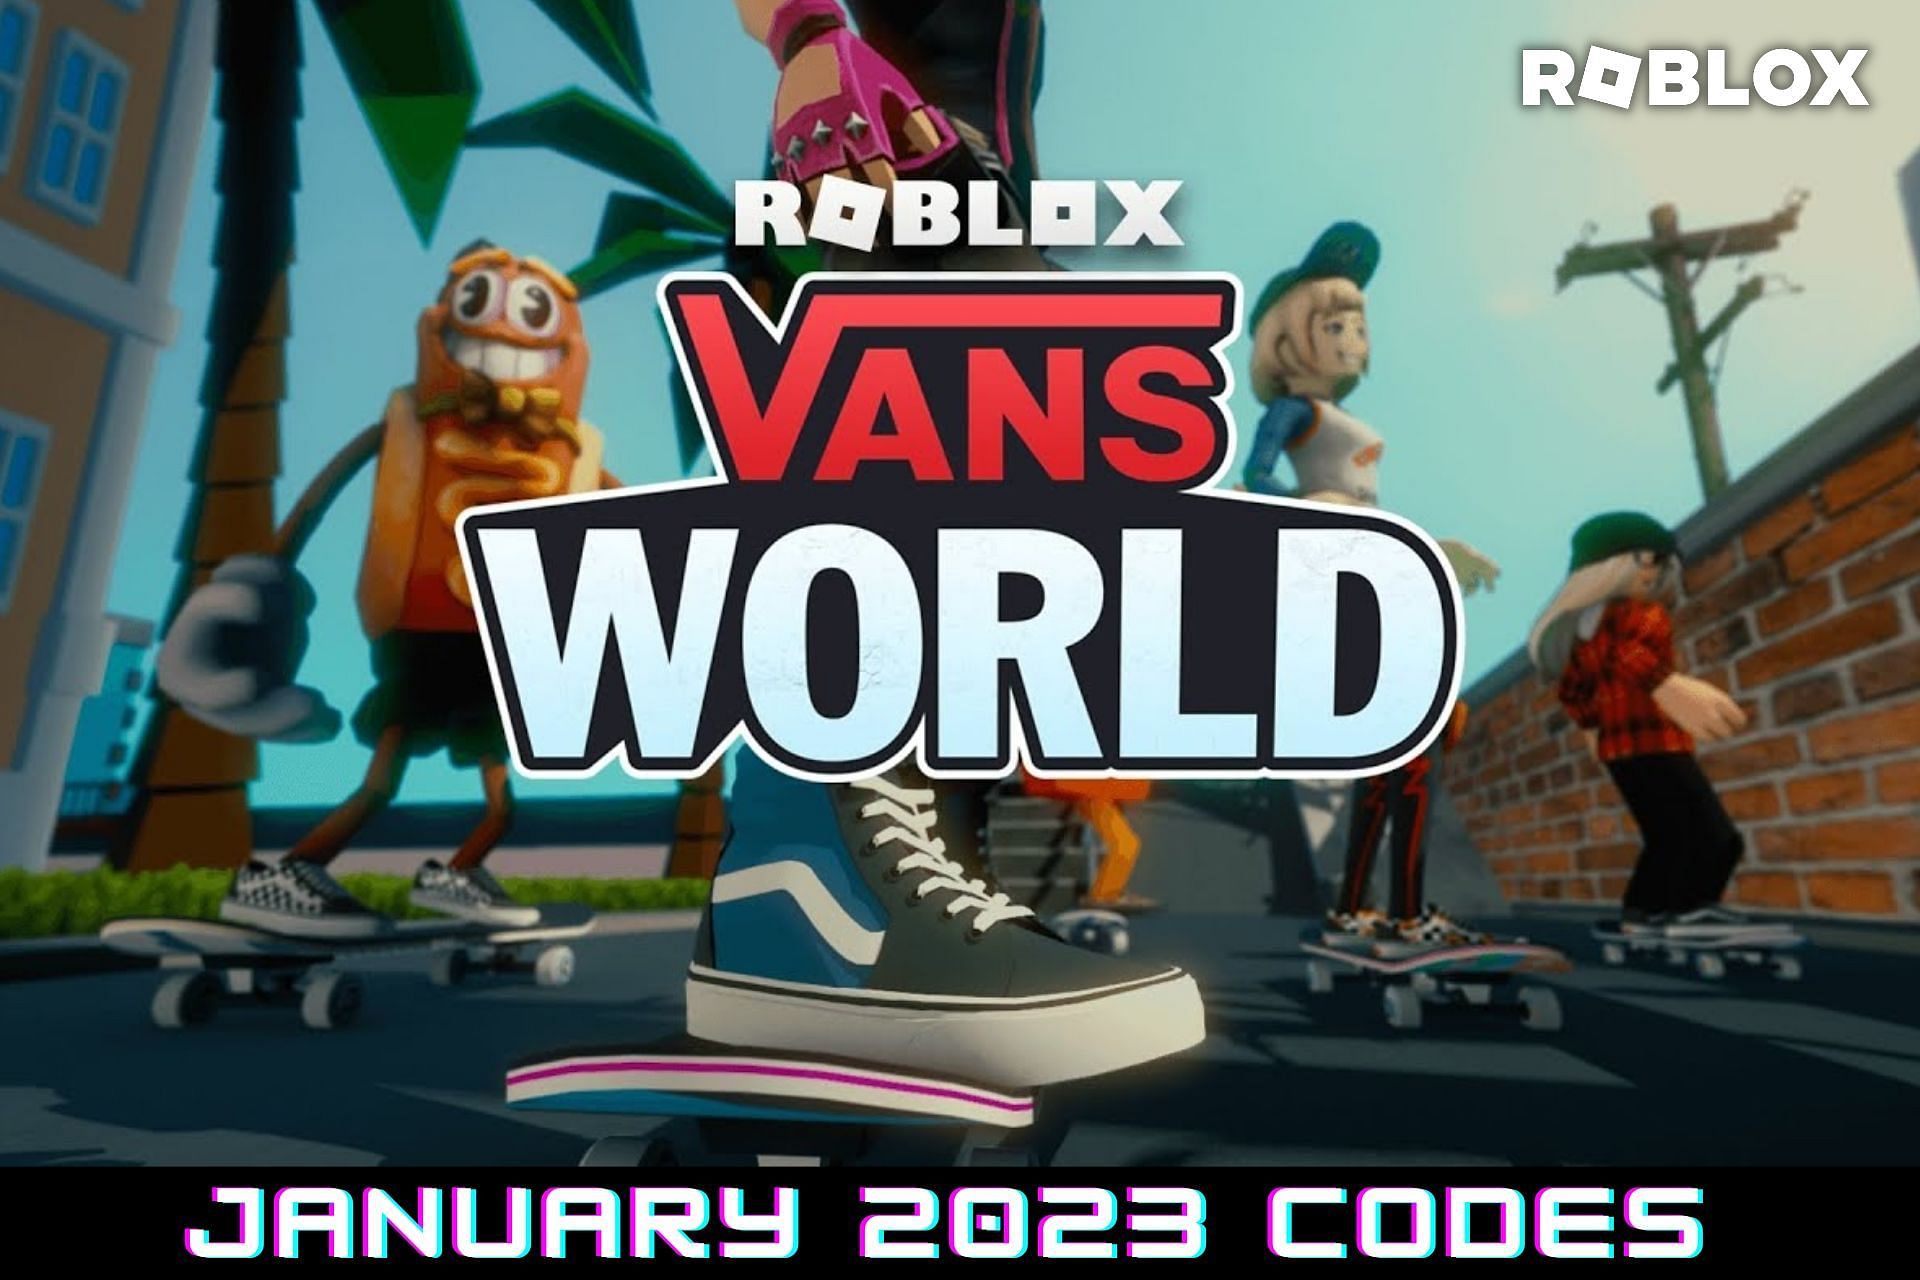 Roblox Vans World codes for January 2023 Free XP, coins, and more